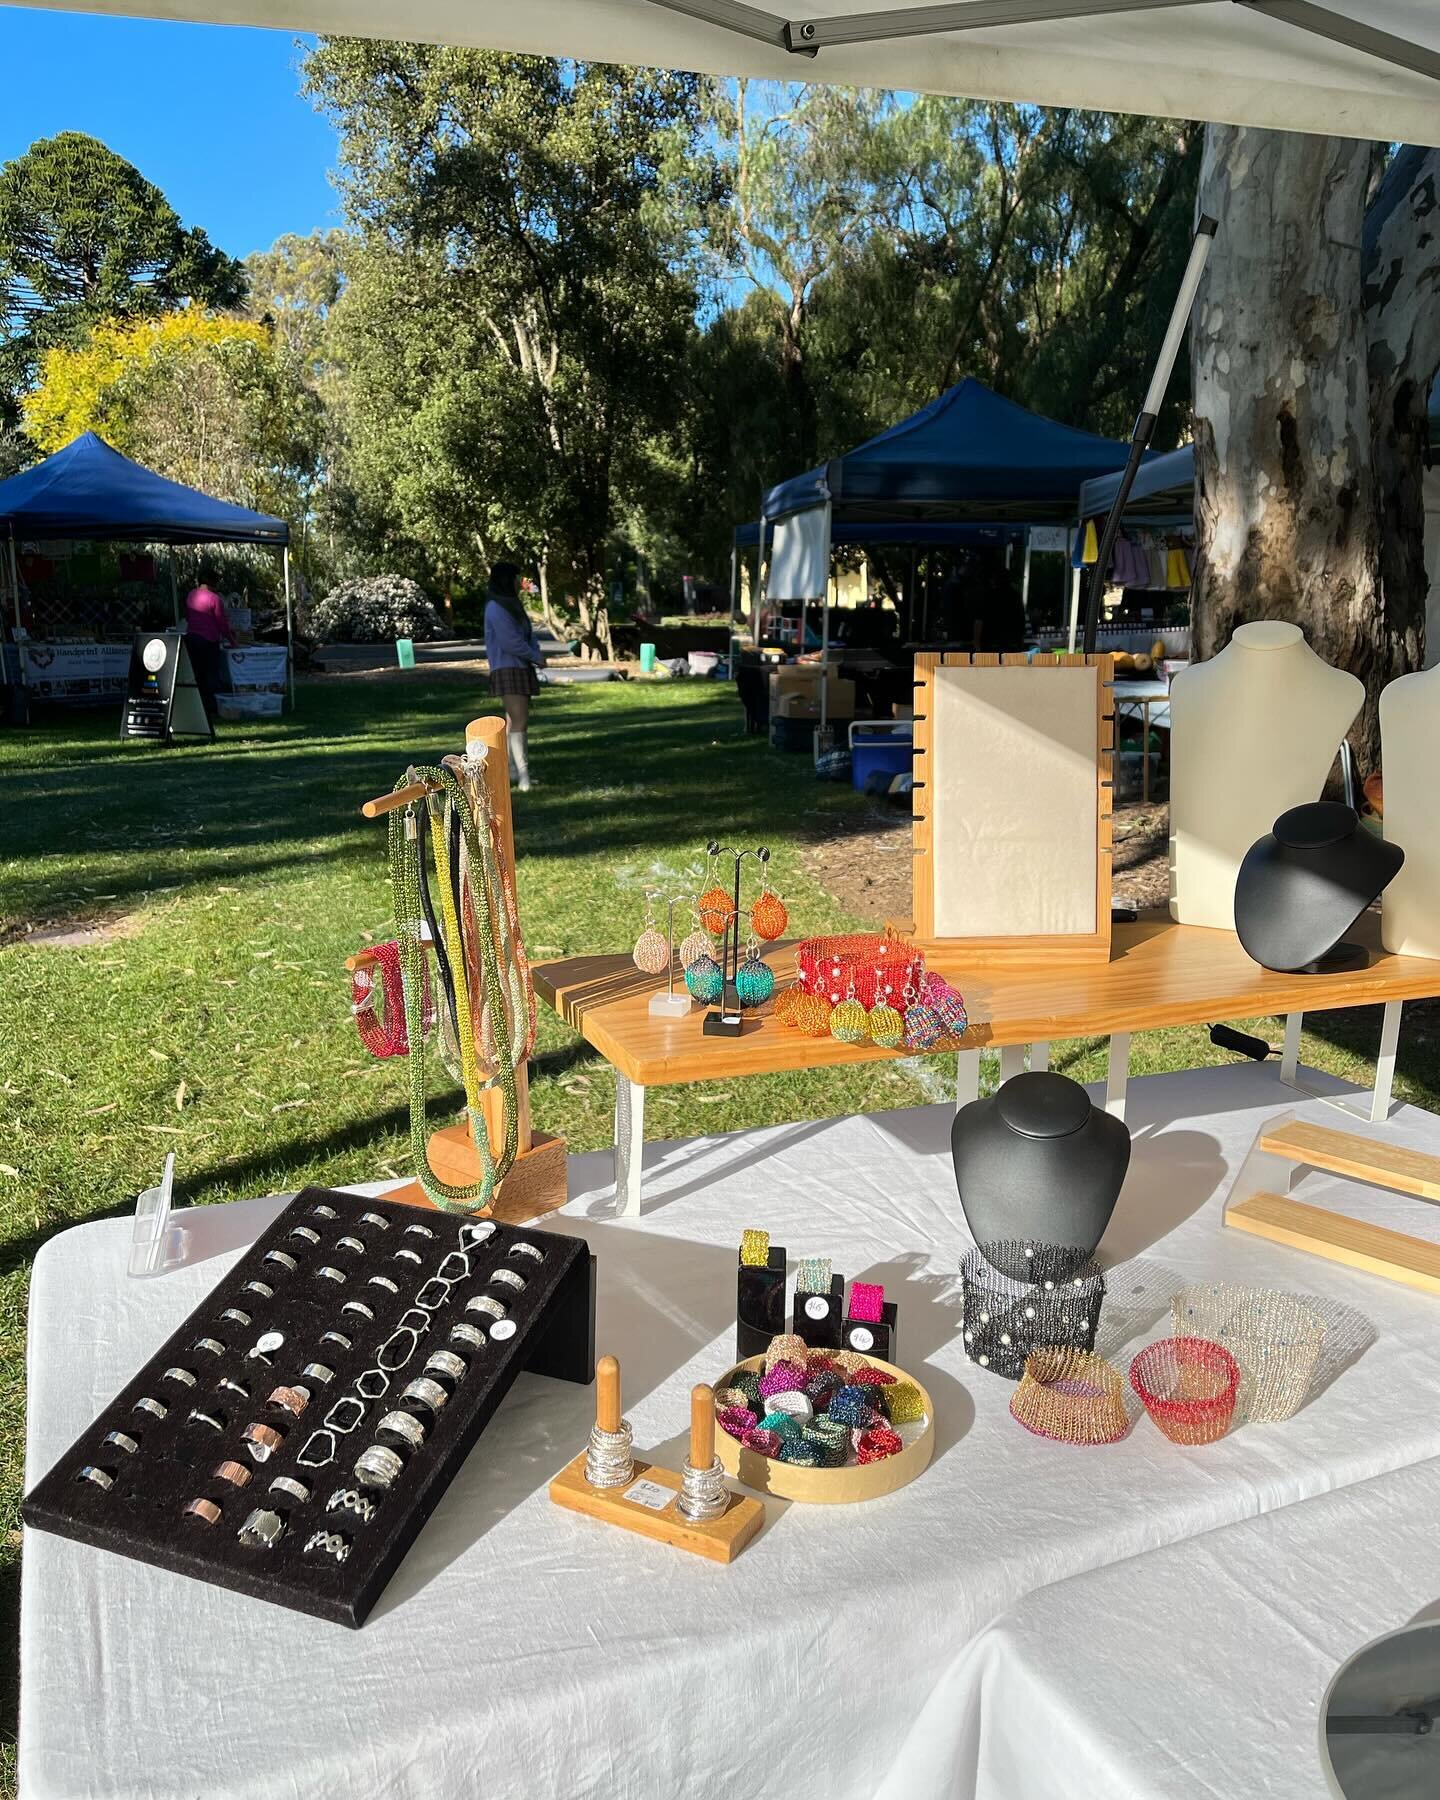 Erring up this morning at Fullarton Market it was a glorious day. This picture of my knitted jewellery set the scene 😮😃#knittedjewellery #localbusiness #supportlocal #supportaussieartists #womeninbusinessaustralia #smallbusinessaustralia #silverjew